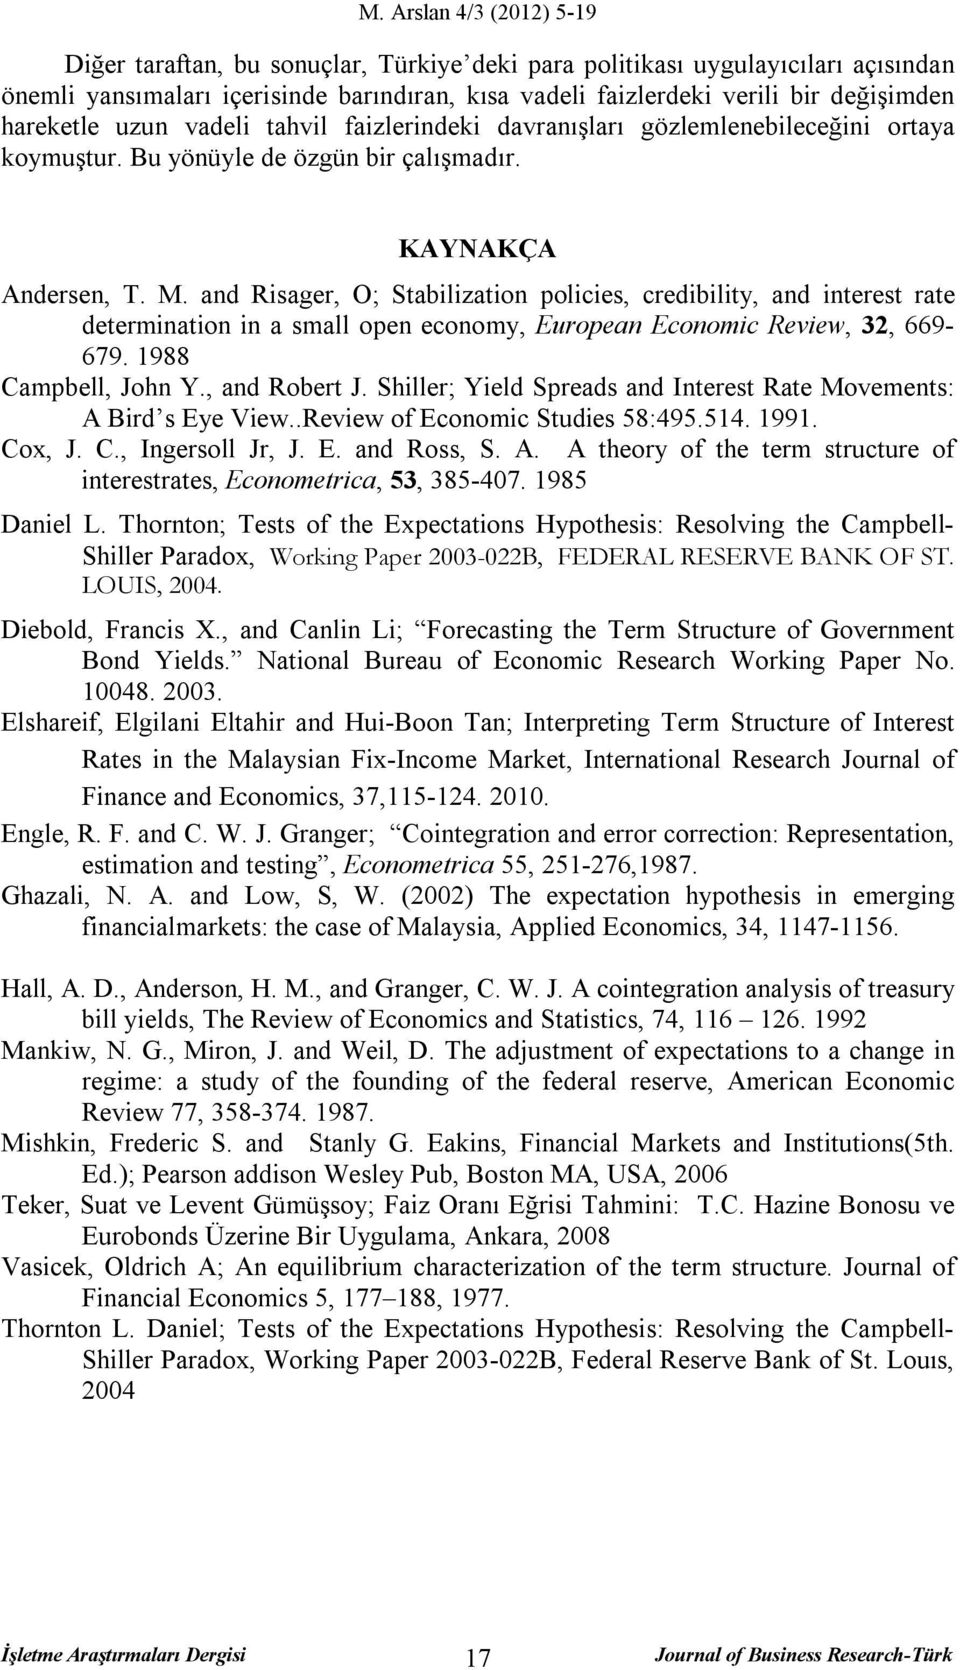 and Risager, O; Stabilization policies, credibility, and interest rate determination in a small open economy, European Economic Review, 32, 669-679. 1988 Campbell, John Y., and Robert J.